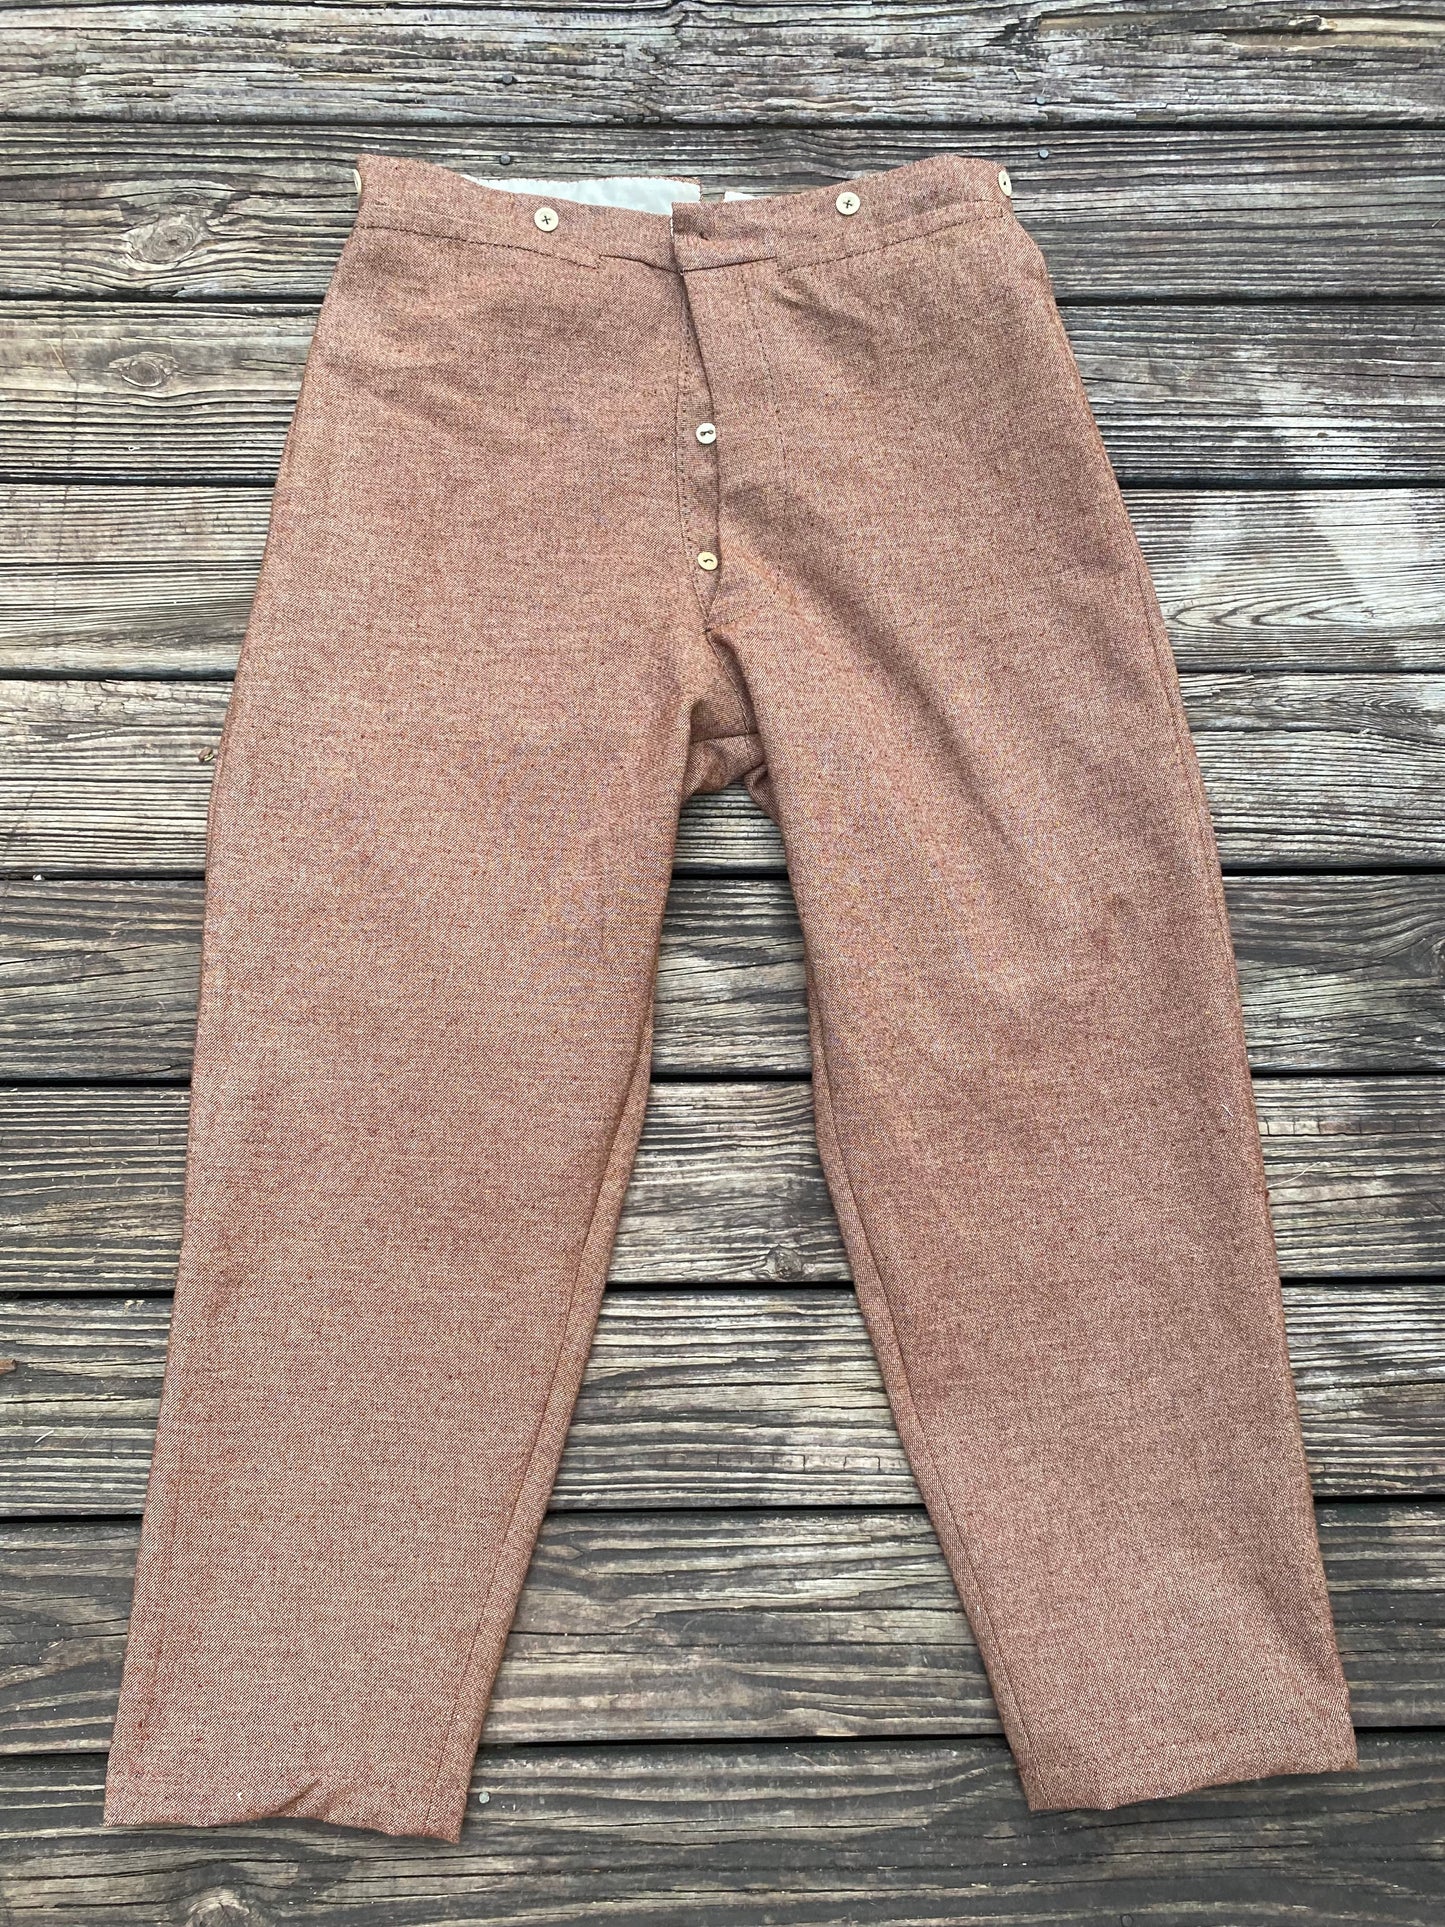 "Deep South" Mississippi Depot Trousers